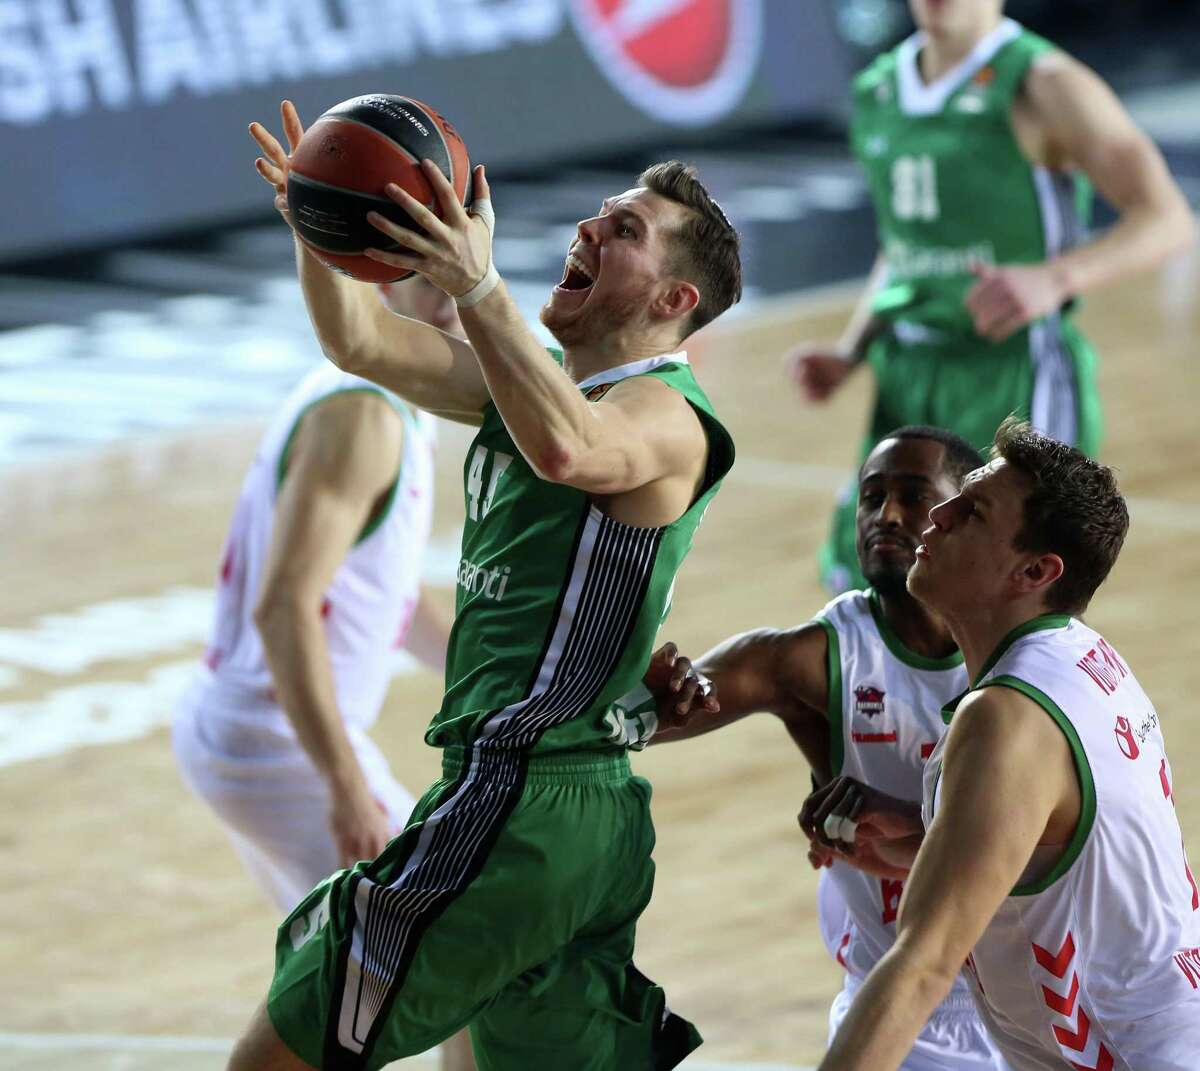 Dairis Bertans, Davis’ older brother, also plays professional basketball as a 6-foot-4 guard with Turkey’s Darussafaka Dogus of the Euroleague.